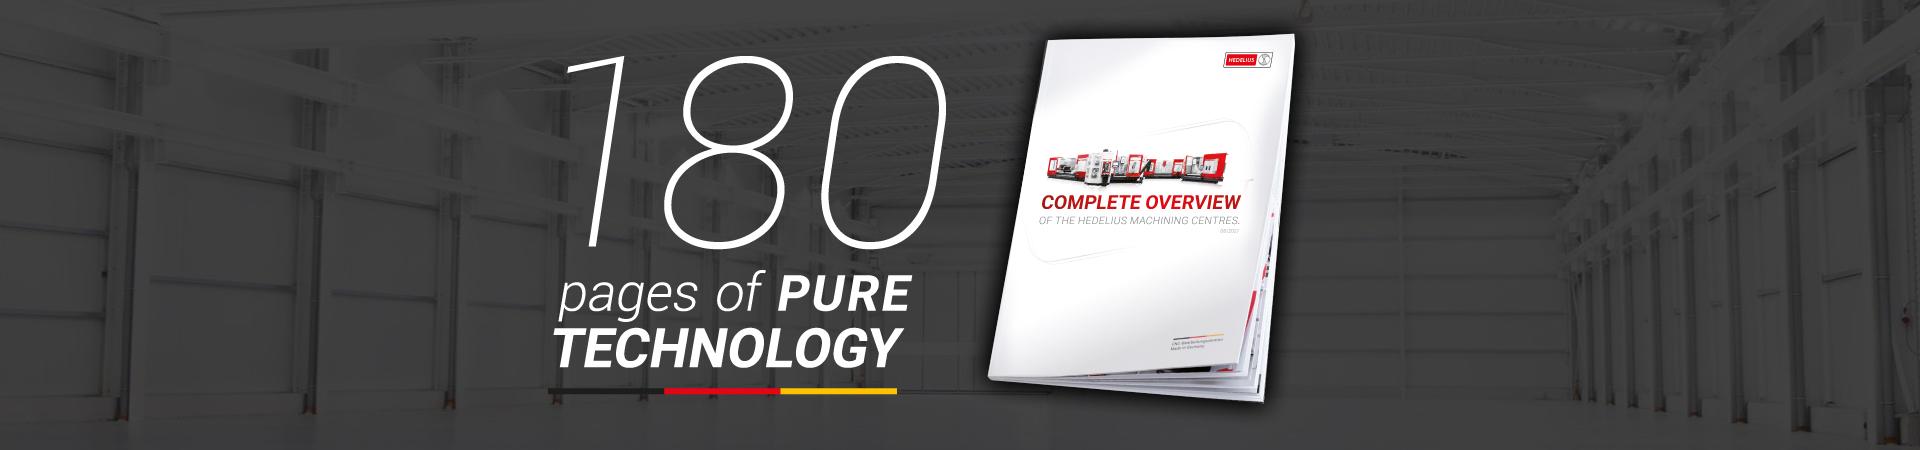 Gain an overview of the full range of technical options, set out clearly and concisely in the most comprehensive catalogue in the CNC machining industry. 180 pages of pure technology – in digital and print formats.